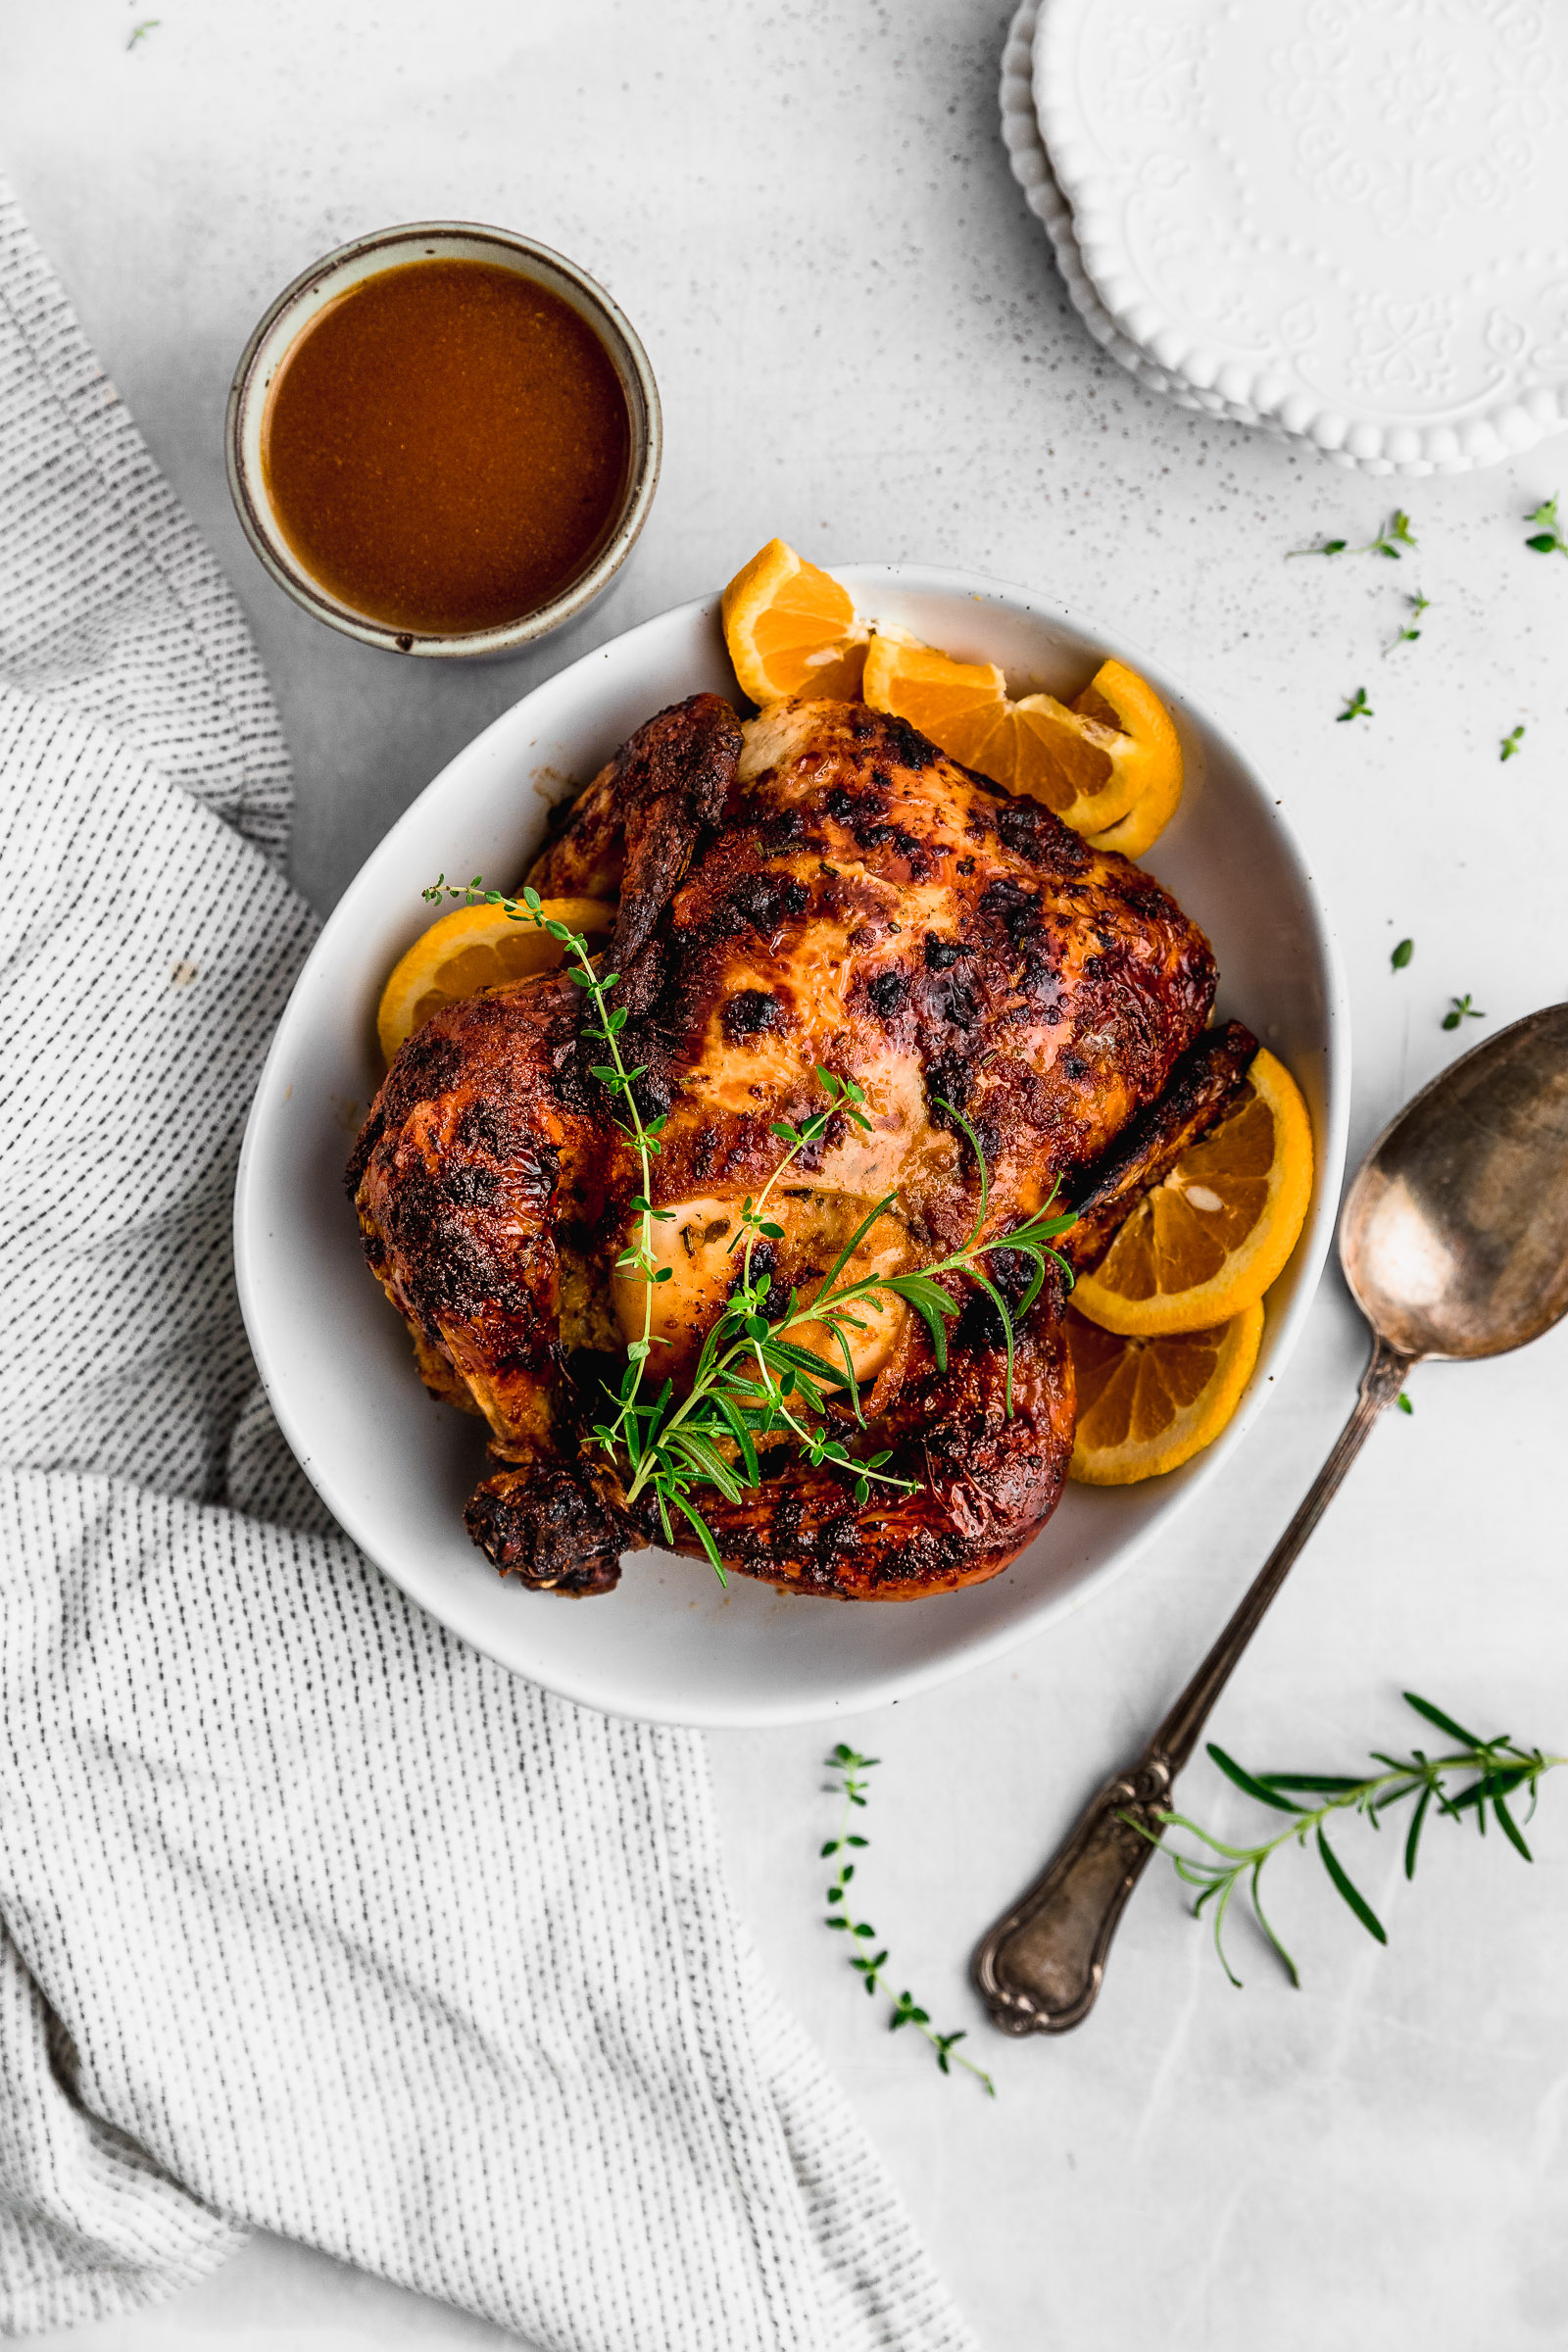 Whole Chicken Honey orange roasted chicken, serve with orange slices and sprigs of rosemary and thyme.